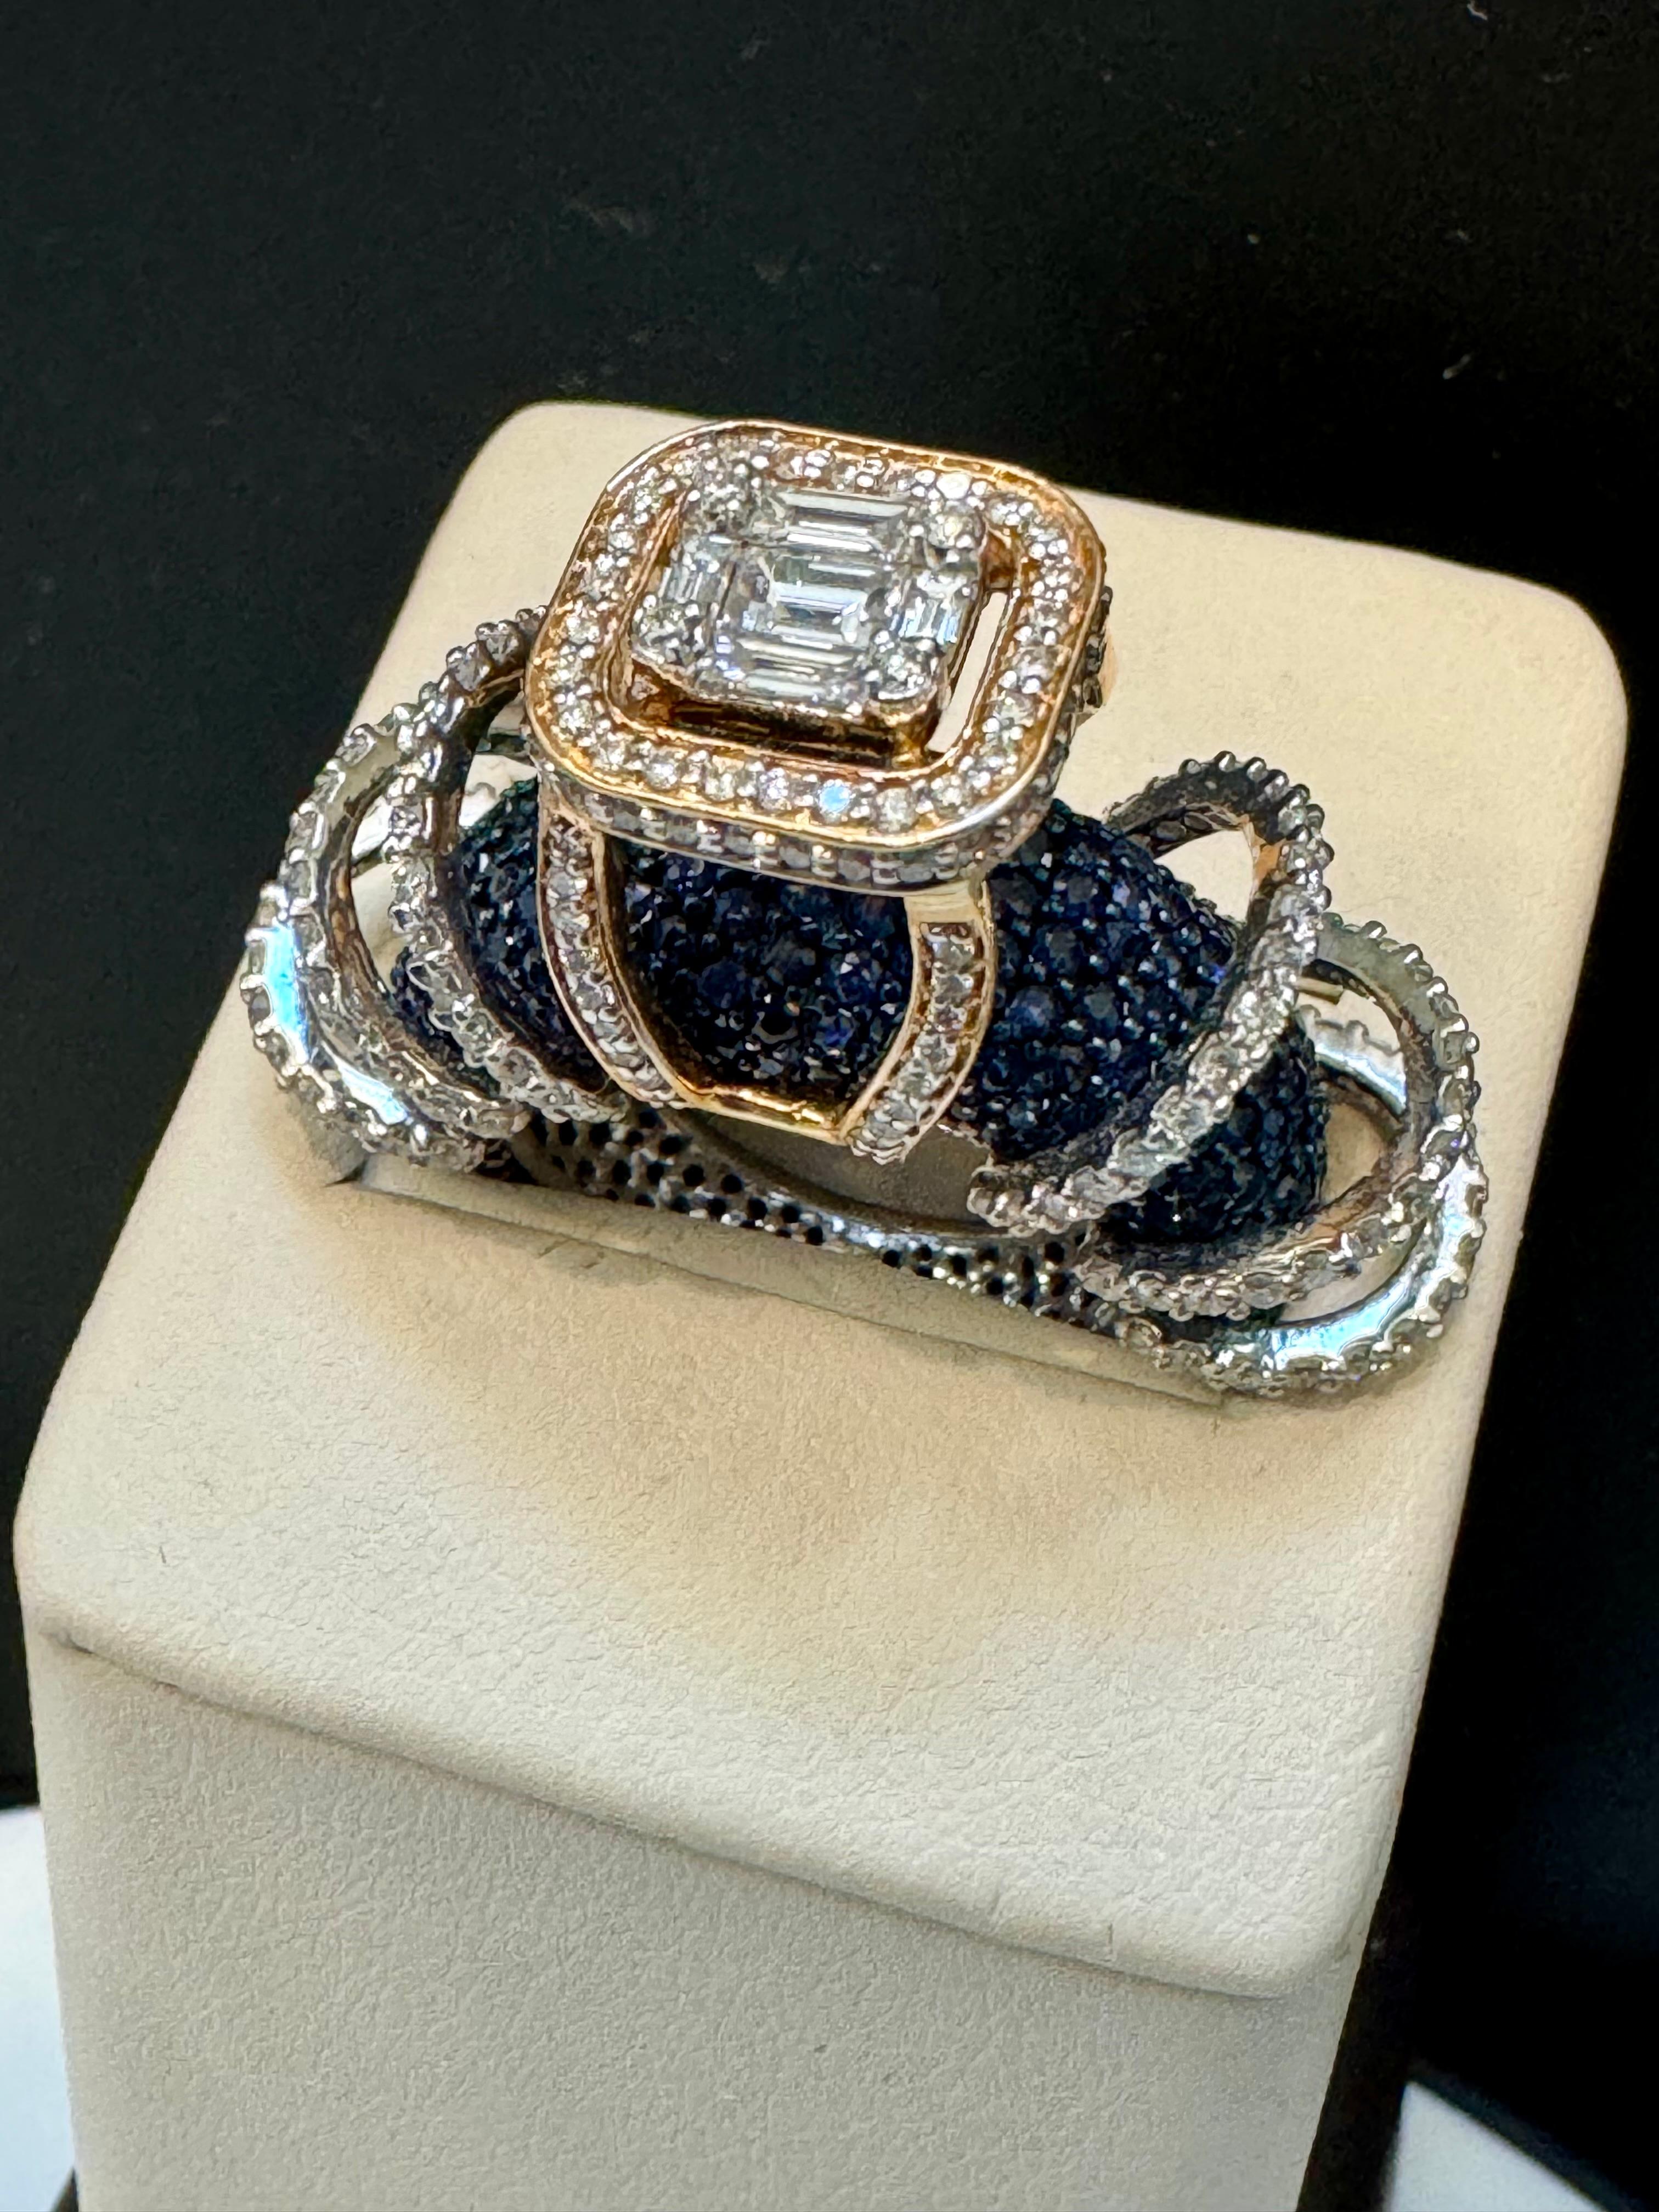 Approximately 5 Ct Blue Sapphire & 2 Ct Diamond Cocktail Ring in 18 Karat White Gold Estate
Band is made out of Blue Sapphires.
Round Brilliant cut diamond are forming the Swirl over the blue Sapphire
Total Diamond Weight of brilliant Round cut